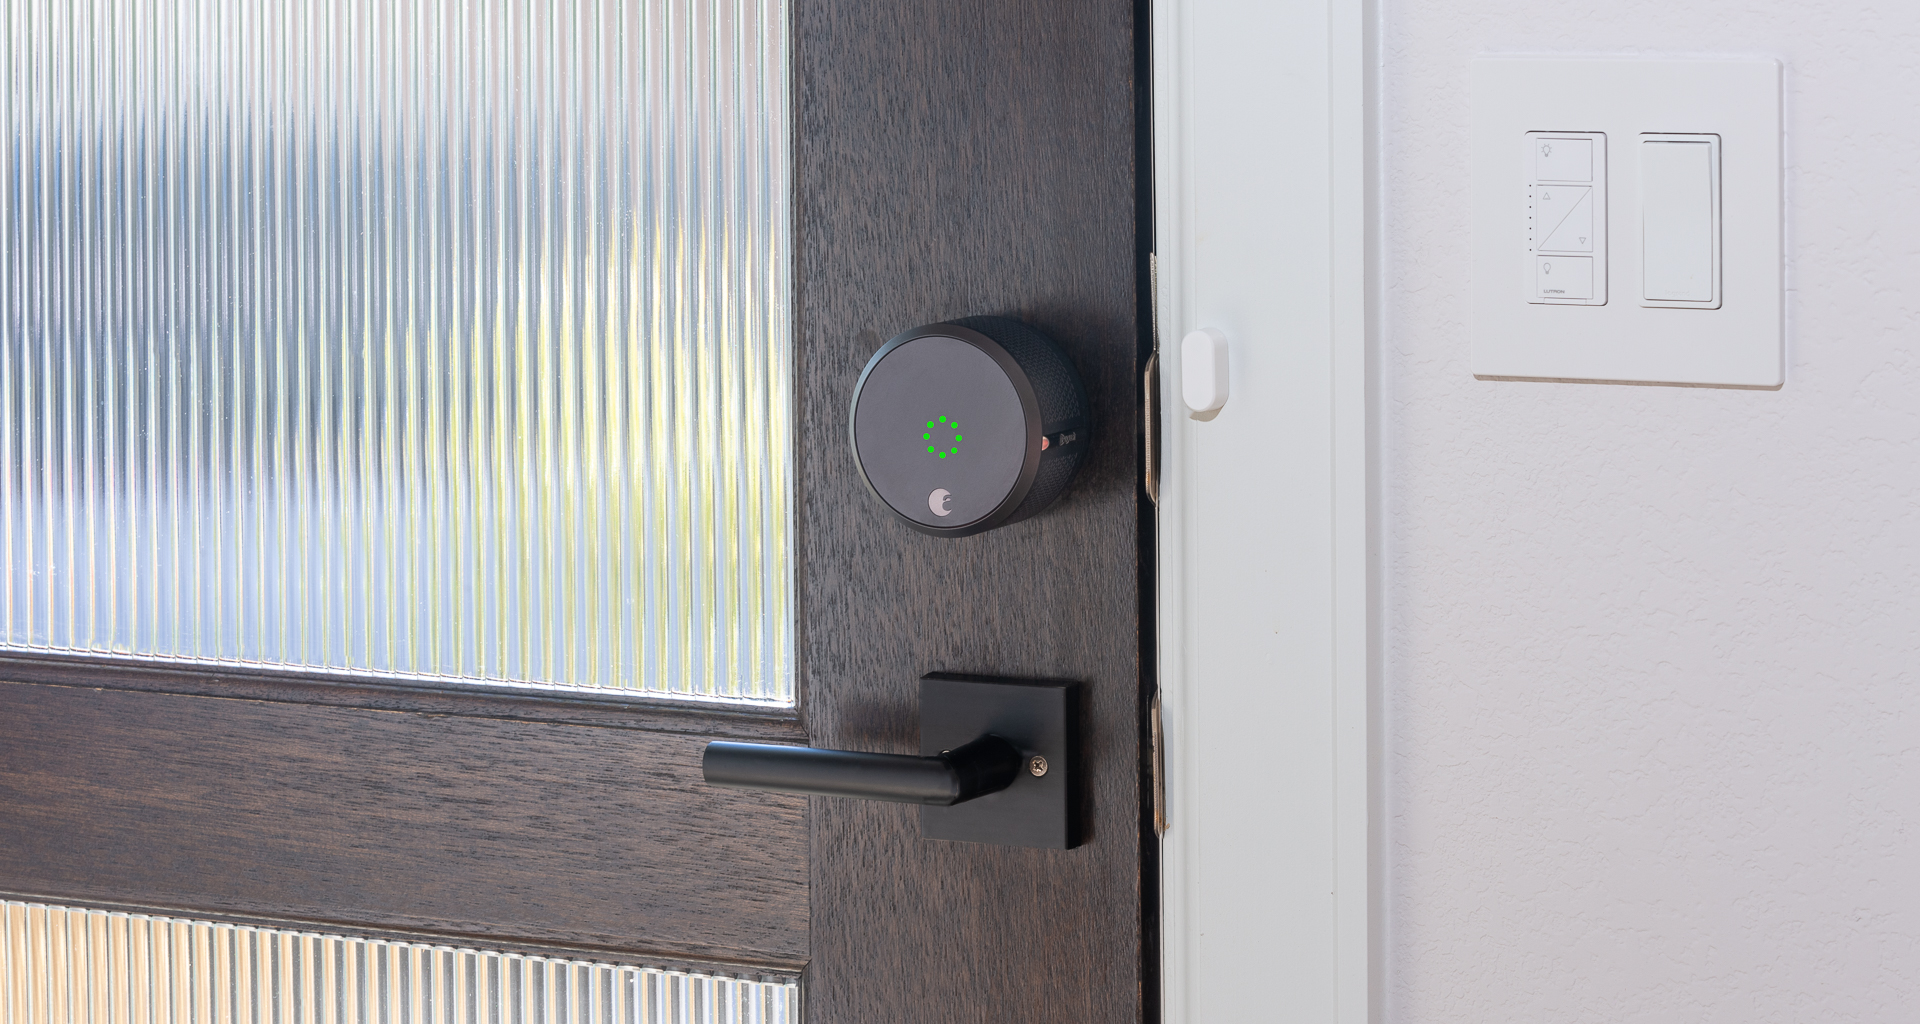 The August Smart Lock Pro. Image: Digitized House.